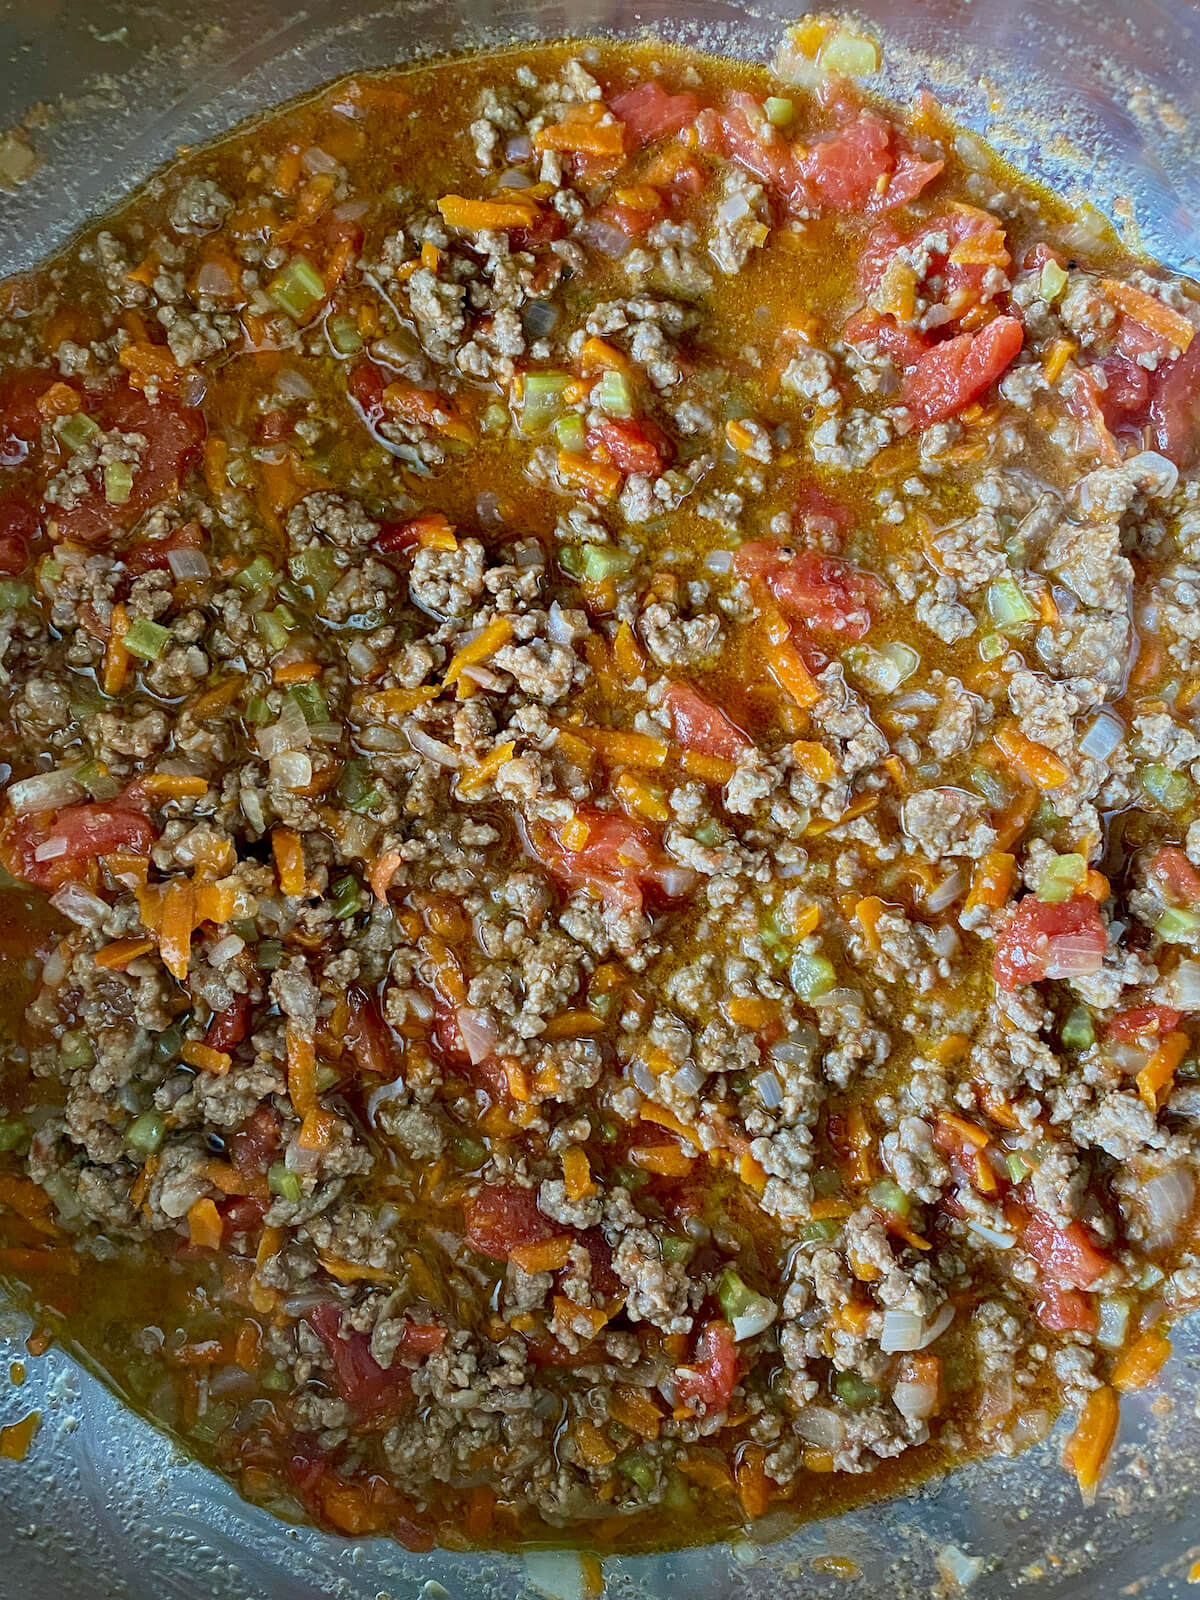 The bolognese sauce simmering after the San Marzano tomatoes have been broken up into smaller pieces.